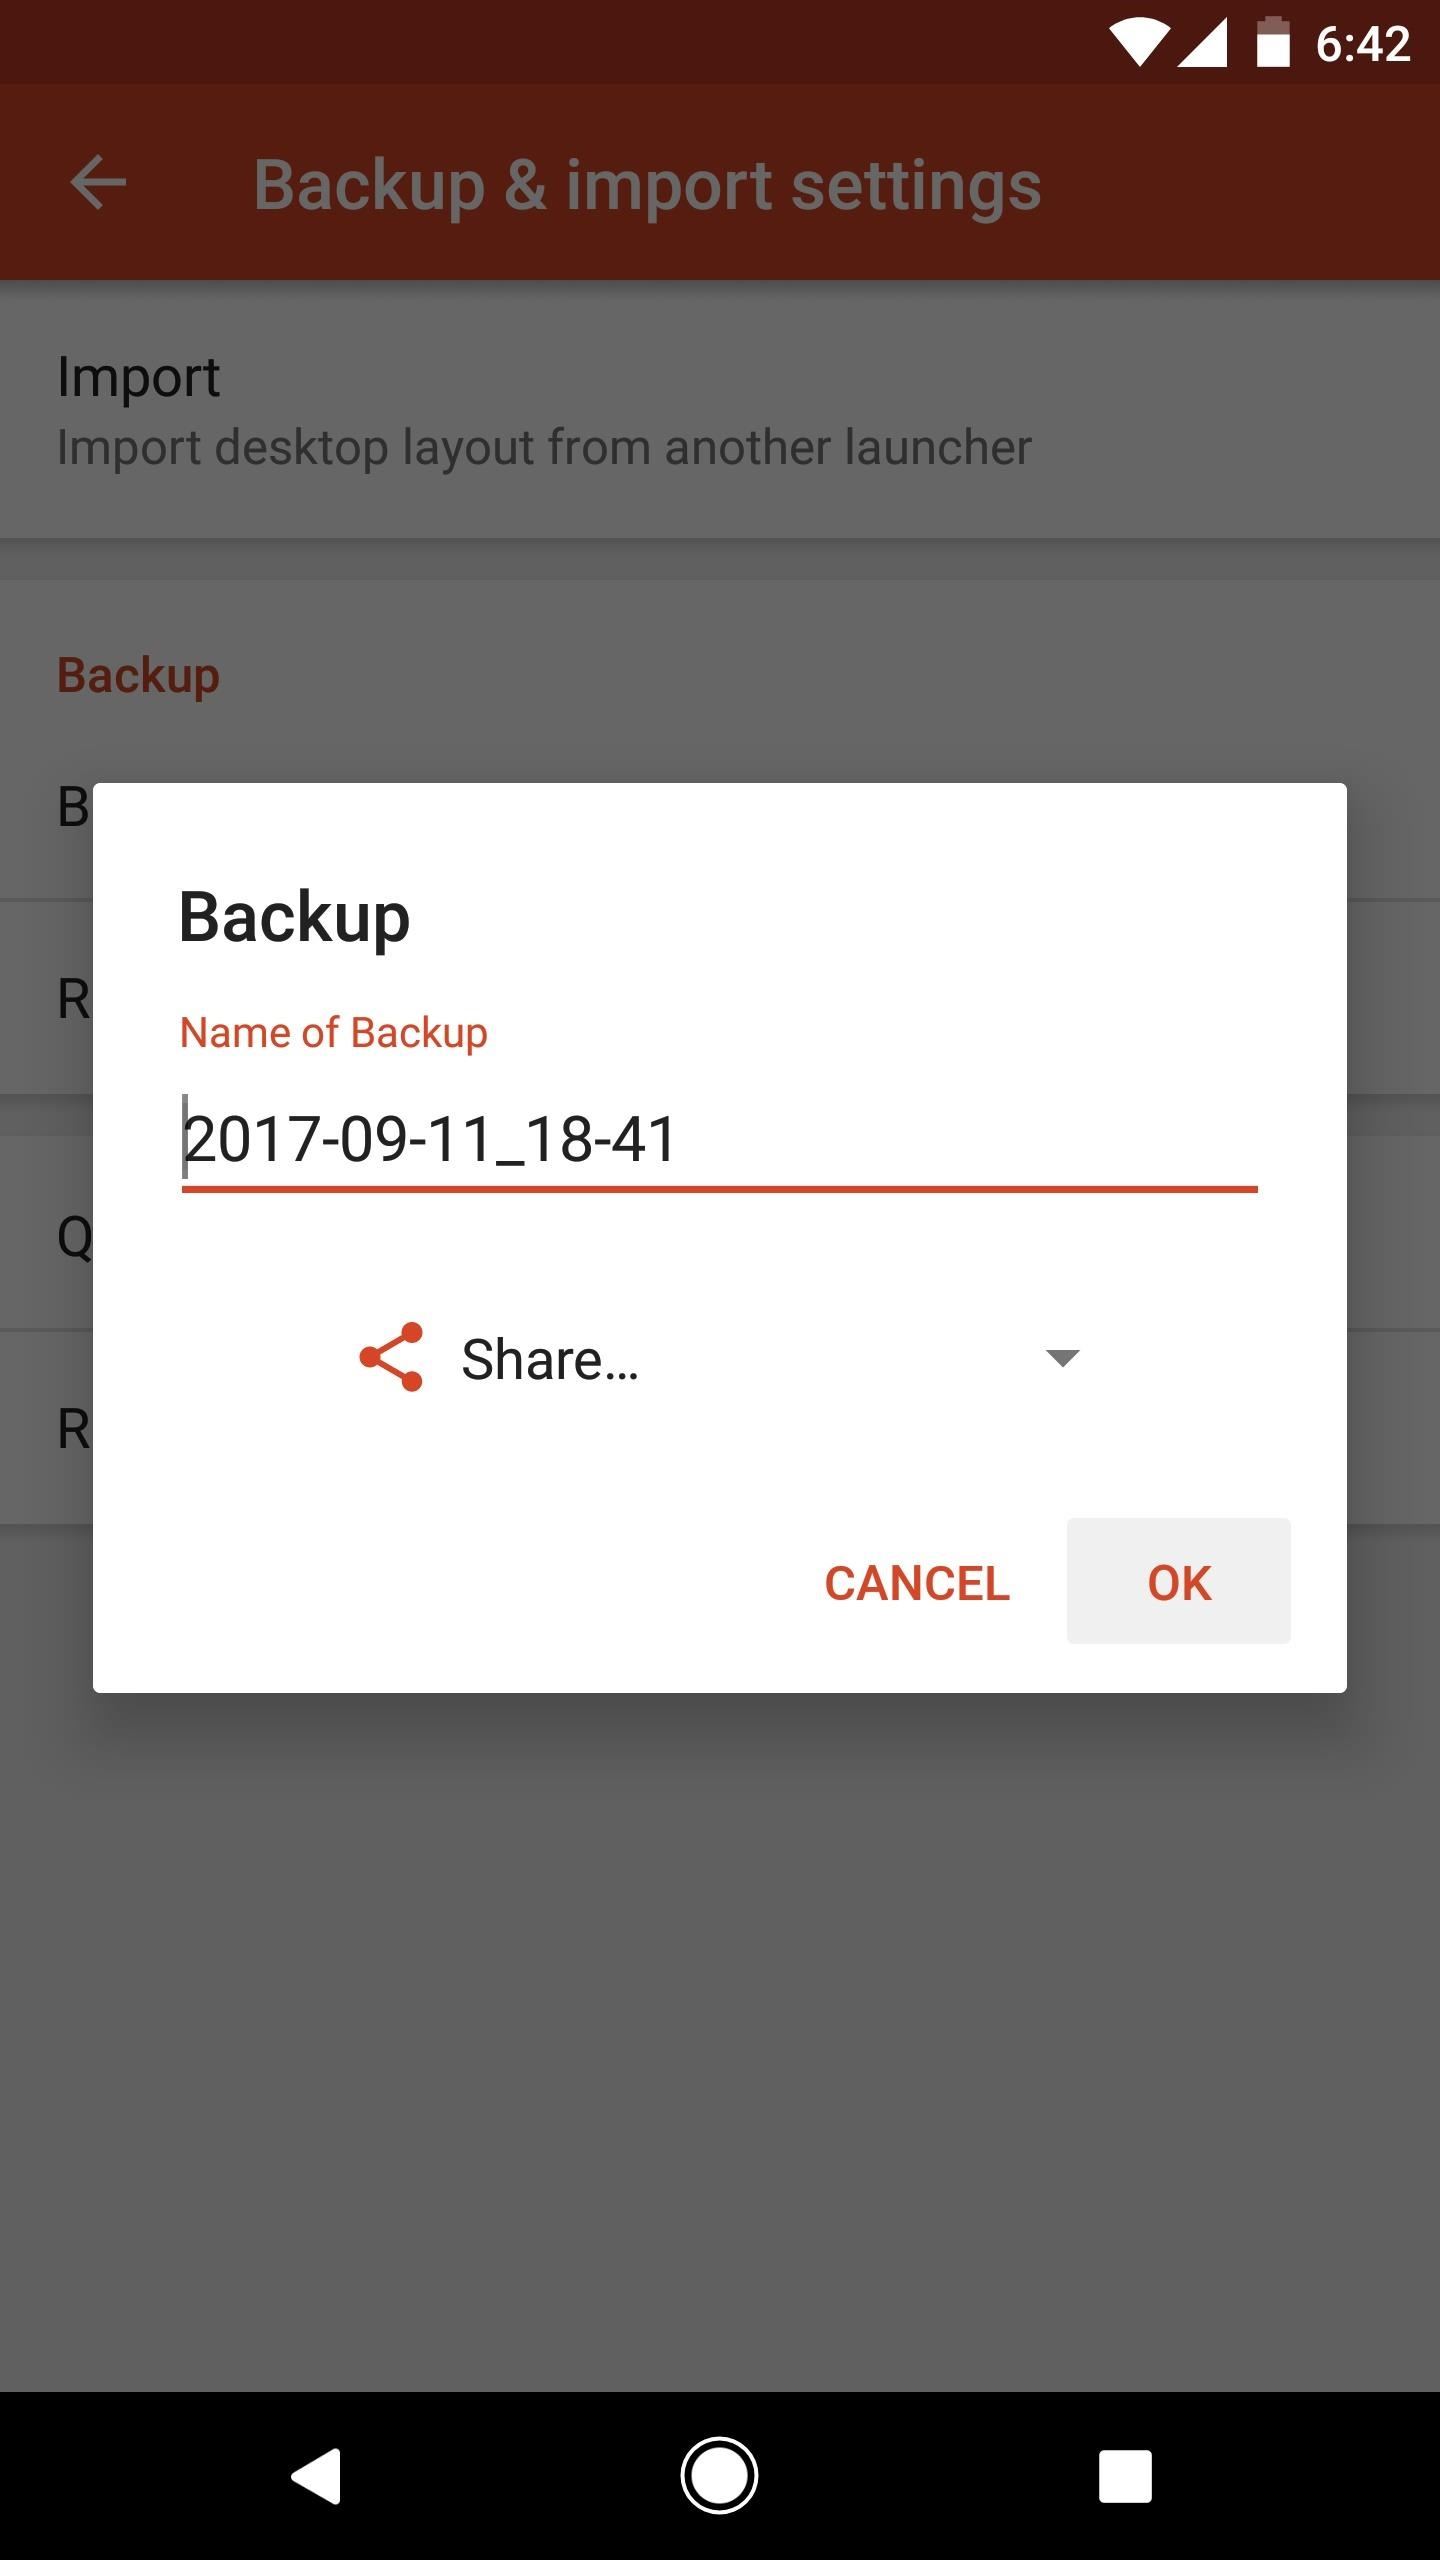 Nova Launcher 101: How to Back Up & Restore Your Home Screen Settings